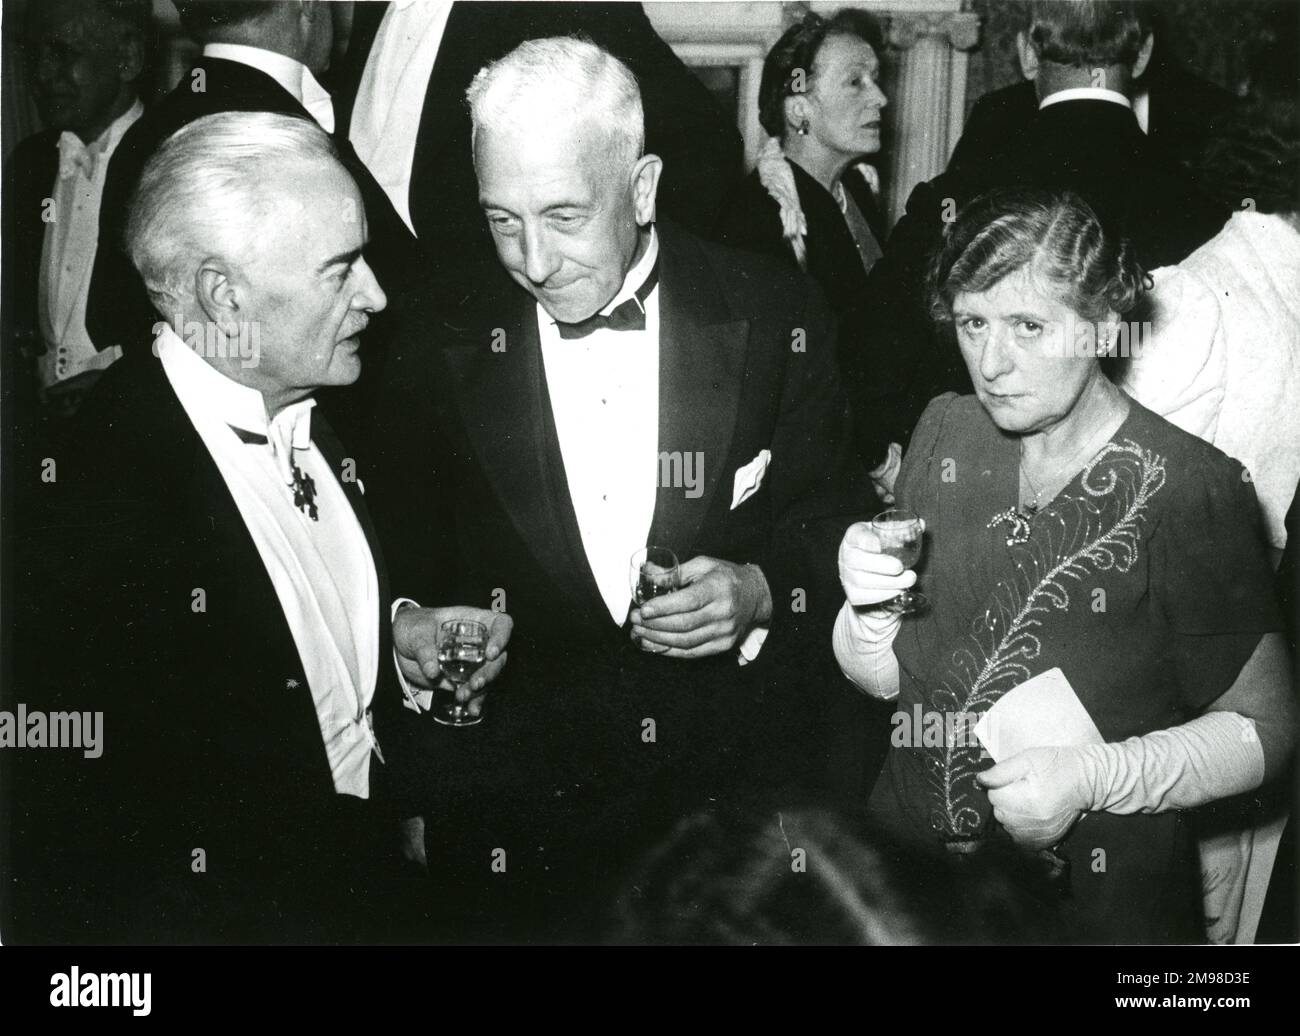 The Royal Aeronautical Society held a dinner at No.4 Hamilton Place in 1949 to celebrate the granting of its Royal Charter dated 22 December 1948. From left: A.G. Elliot, Dr H.J.Gough and Mrs Gough. Stock Photo